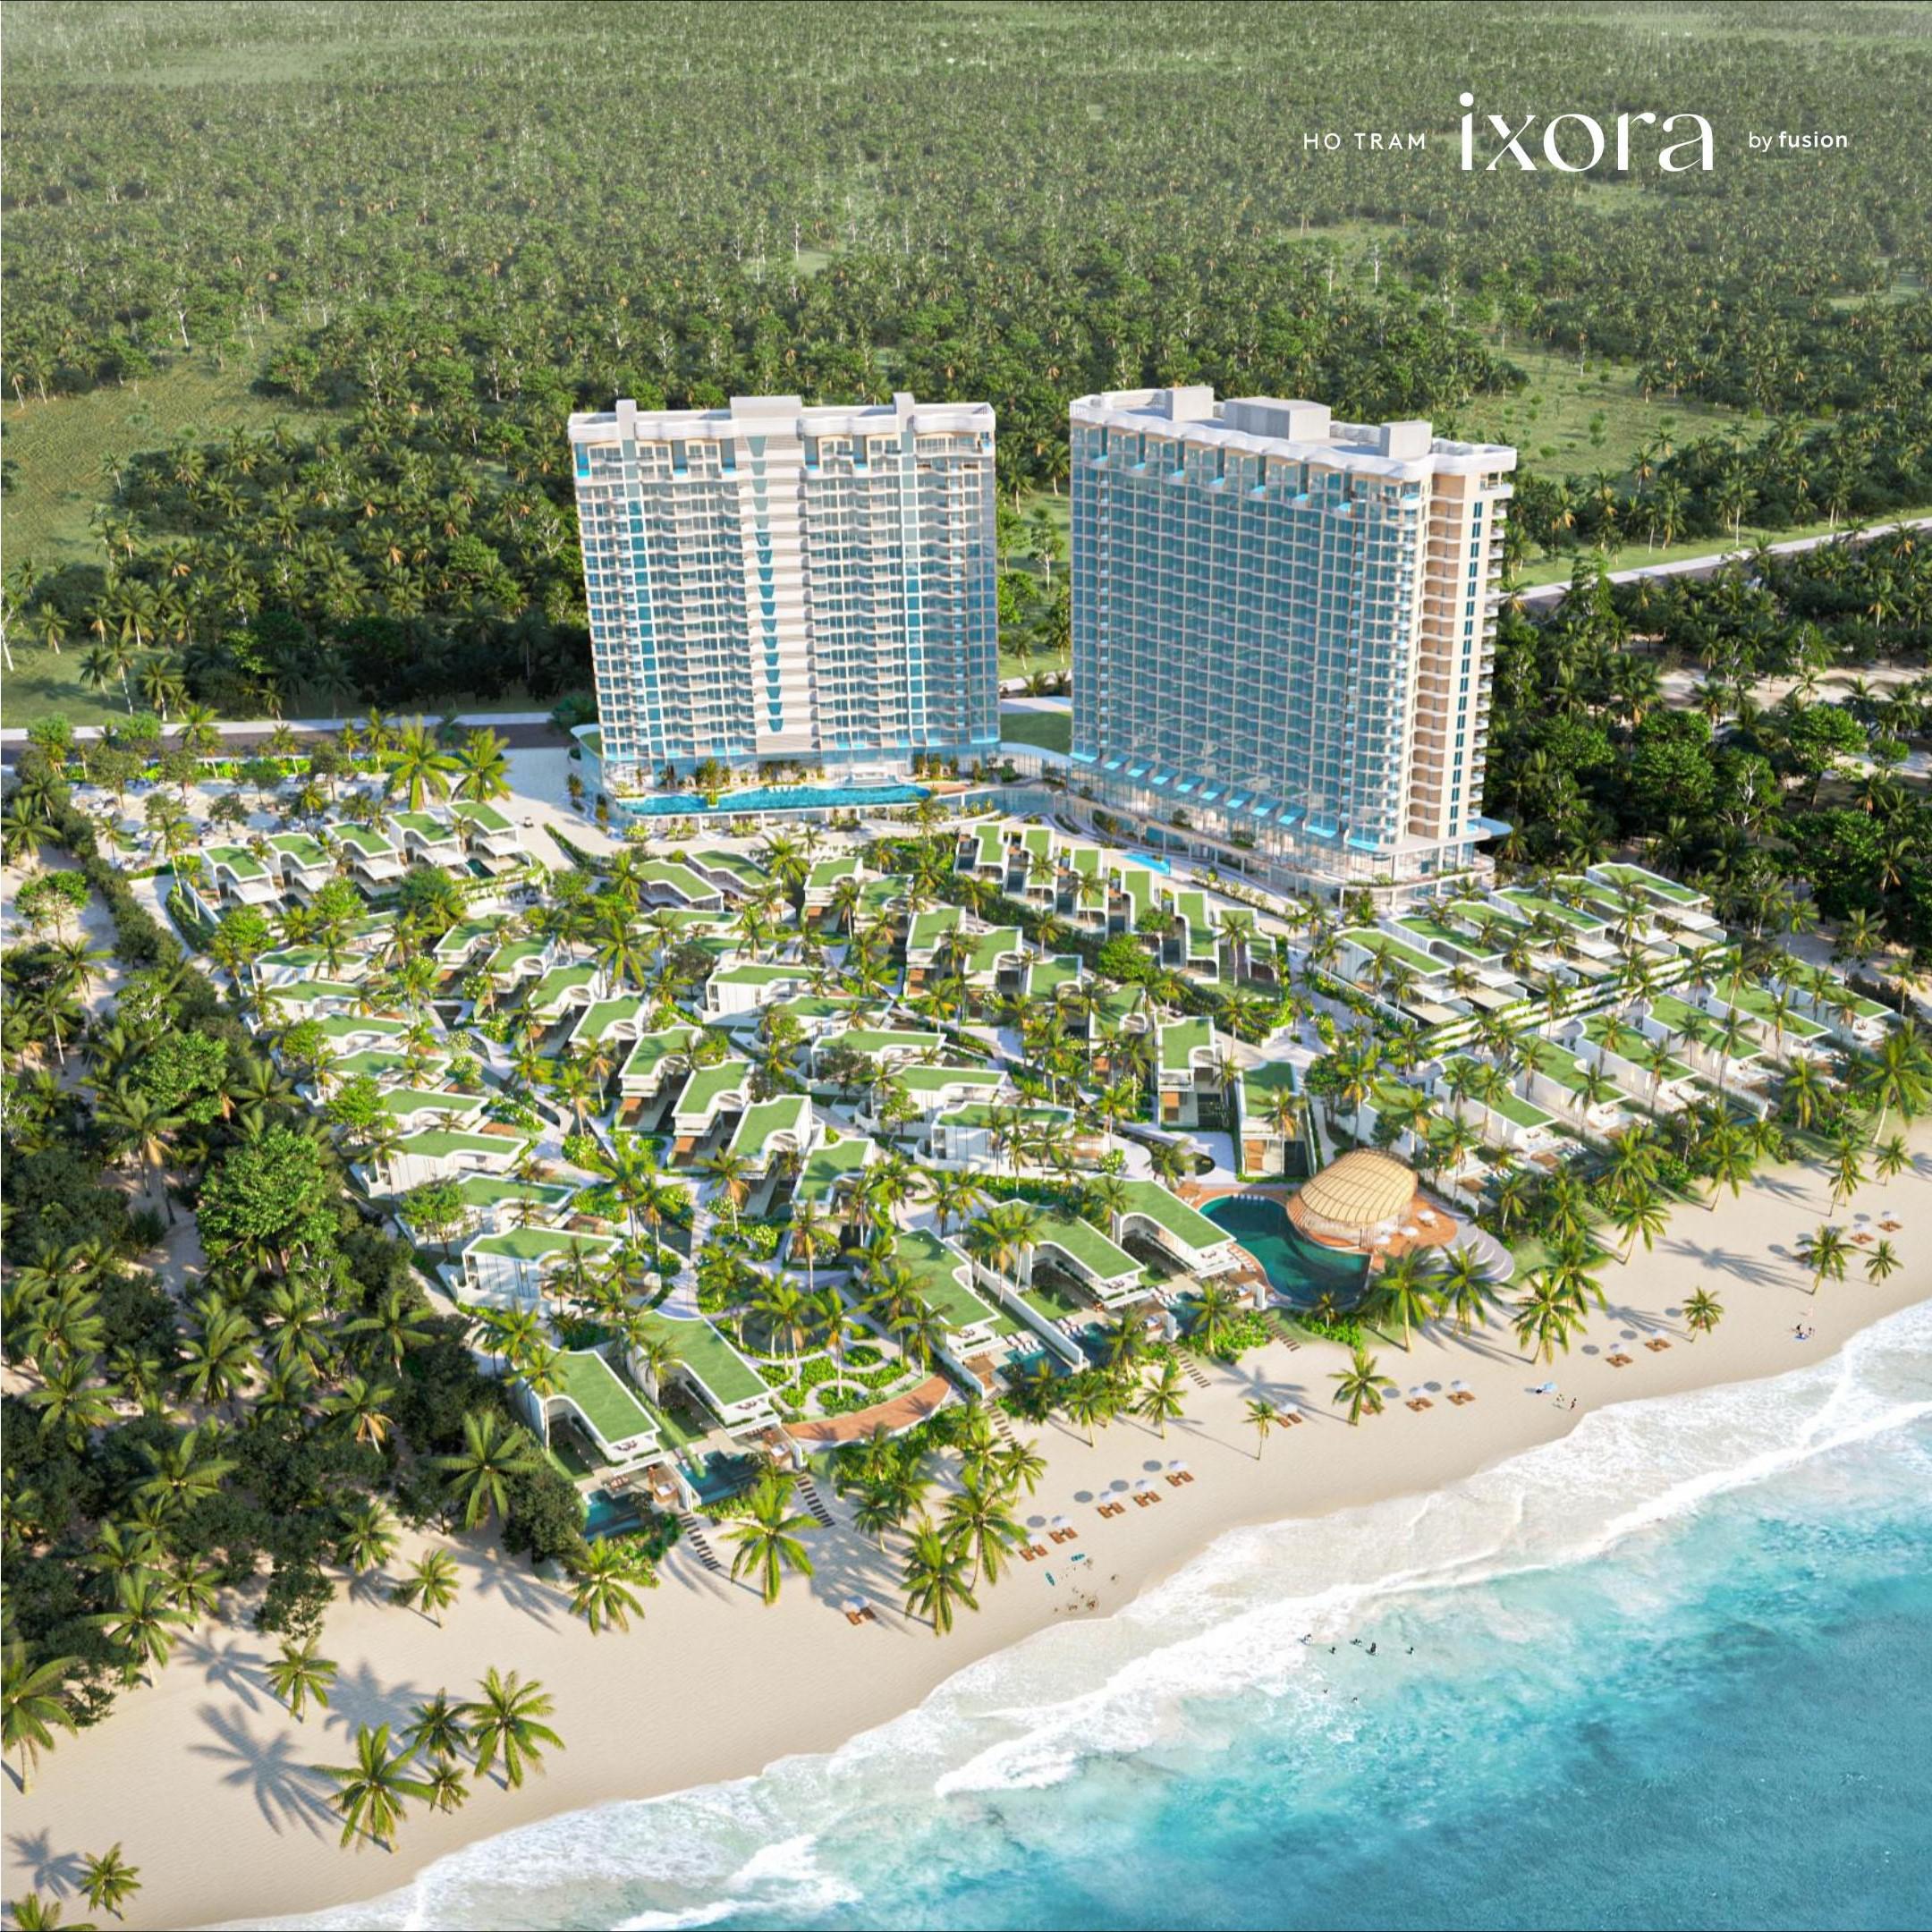 IXORA HO TRAM BY FUSION - A RARE INVESTMENT OPPORTUNITY IN SOUTHEAST ASIA'S BIGGEST WORLD CLASS INTEGRATED RESORT